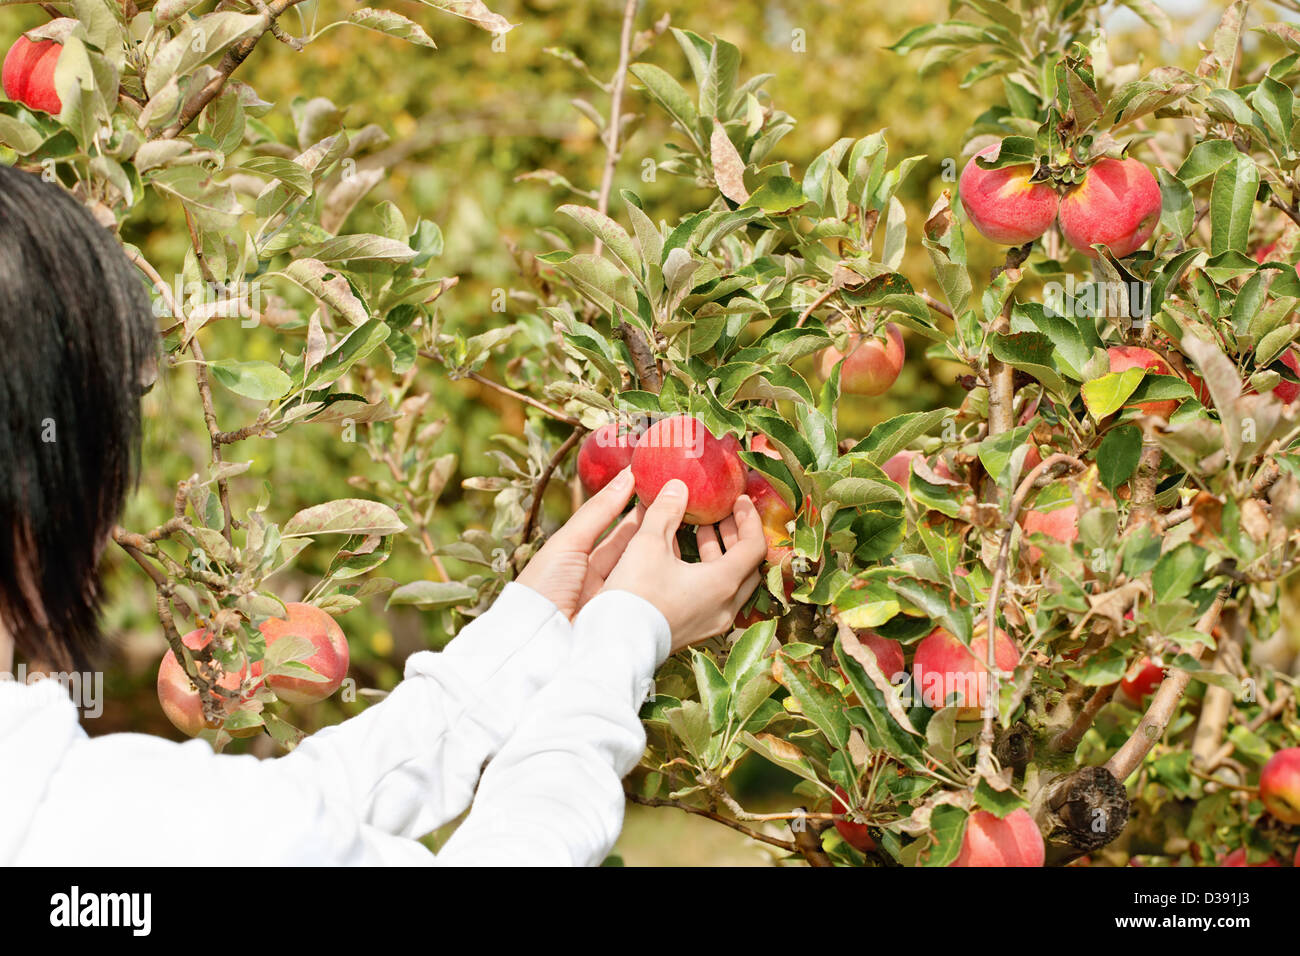 Woman picking apple from branch Stock Photo